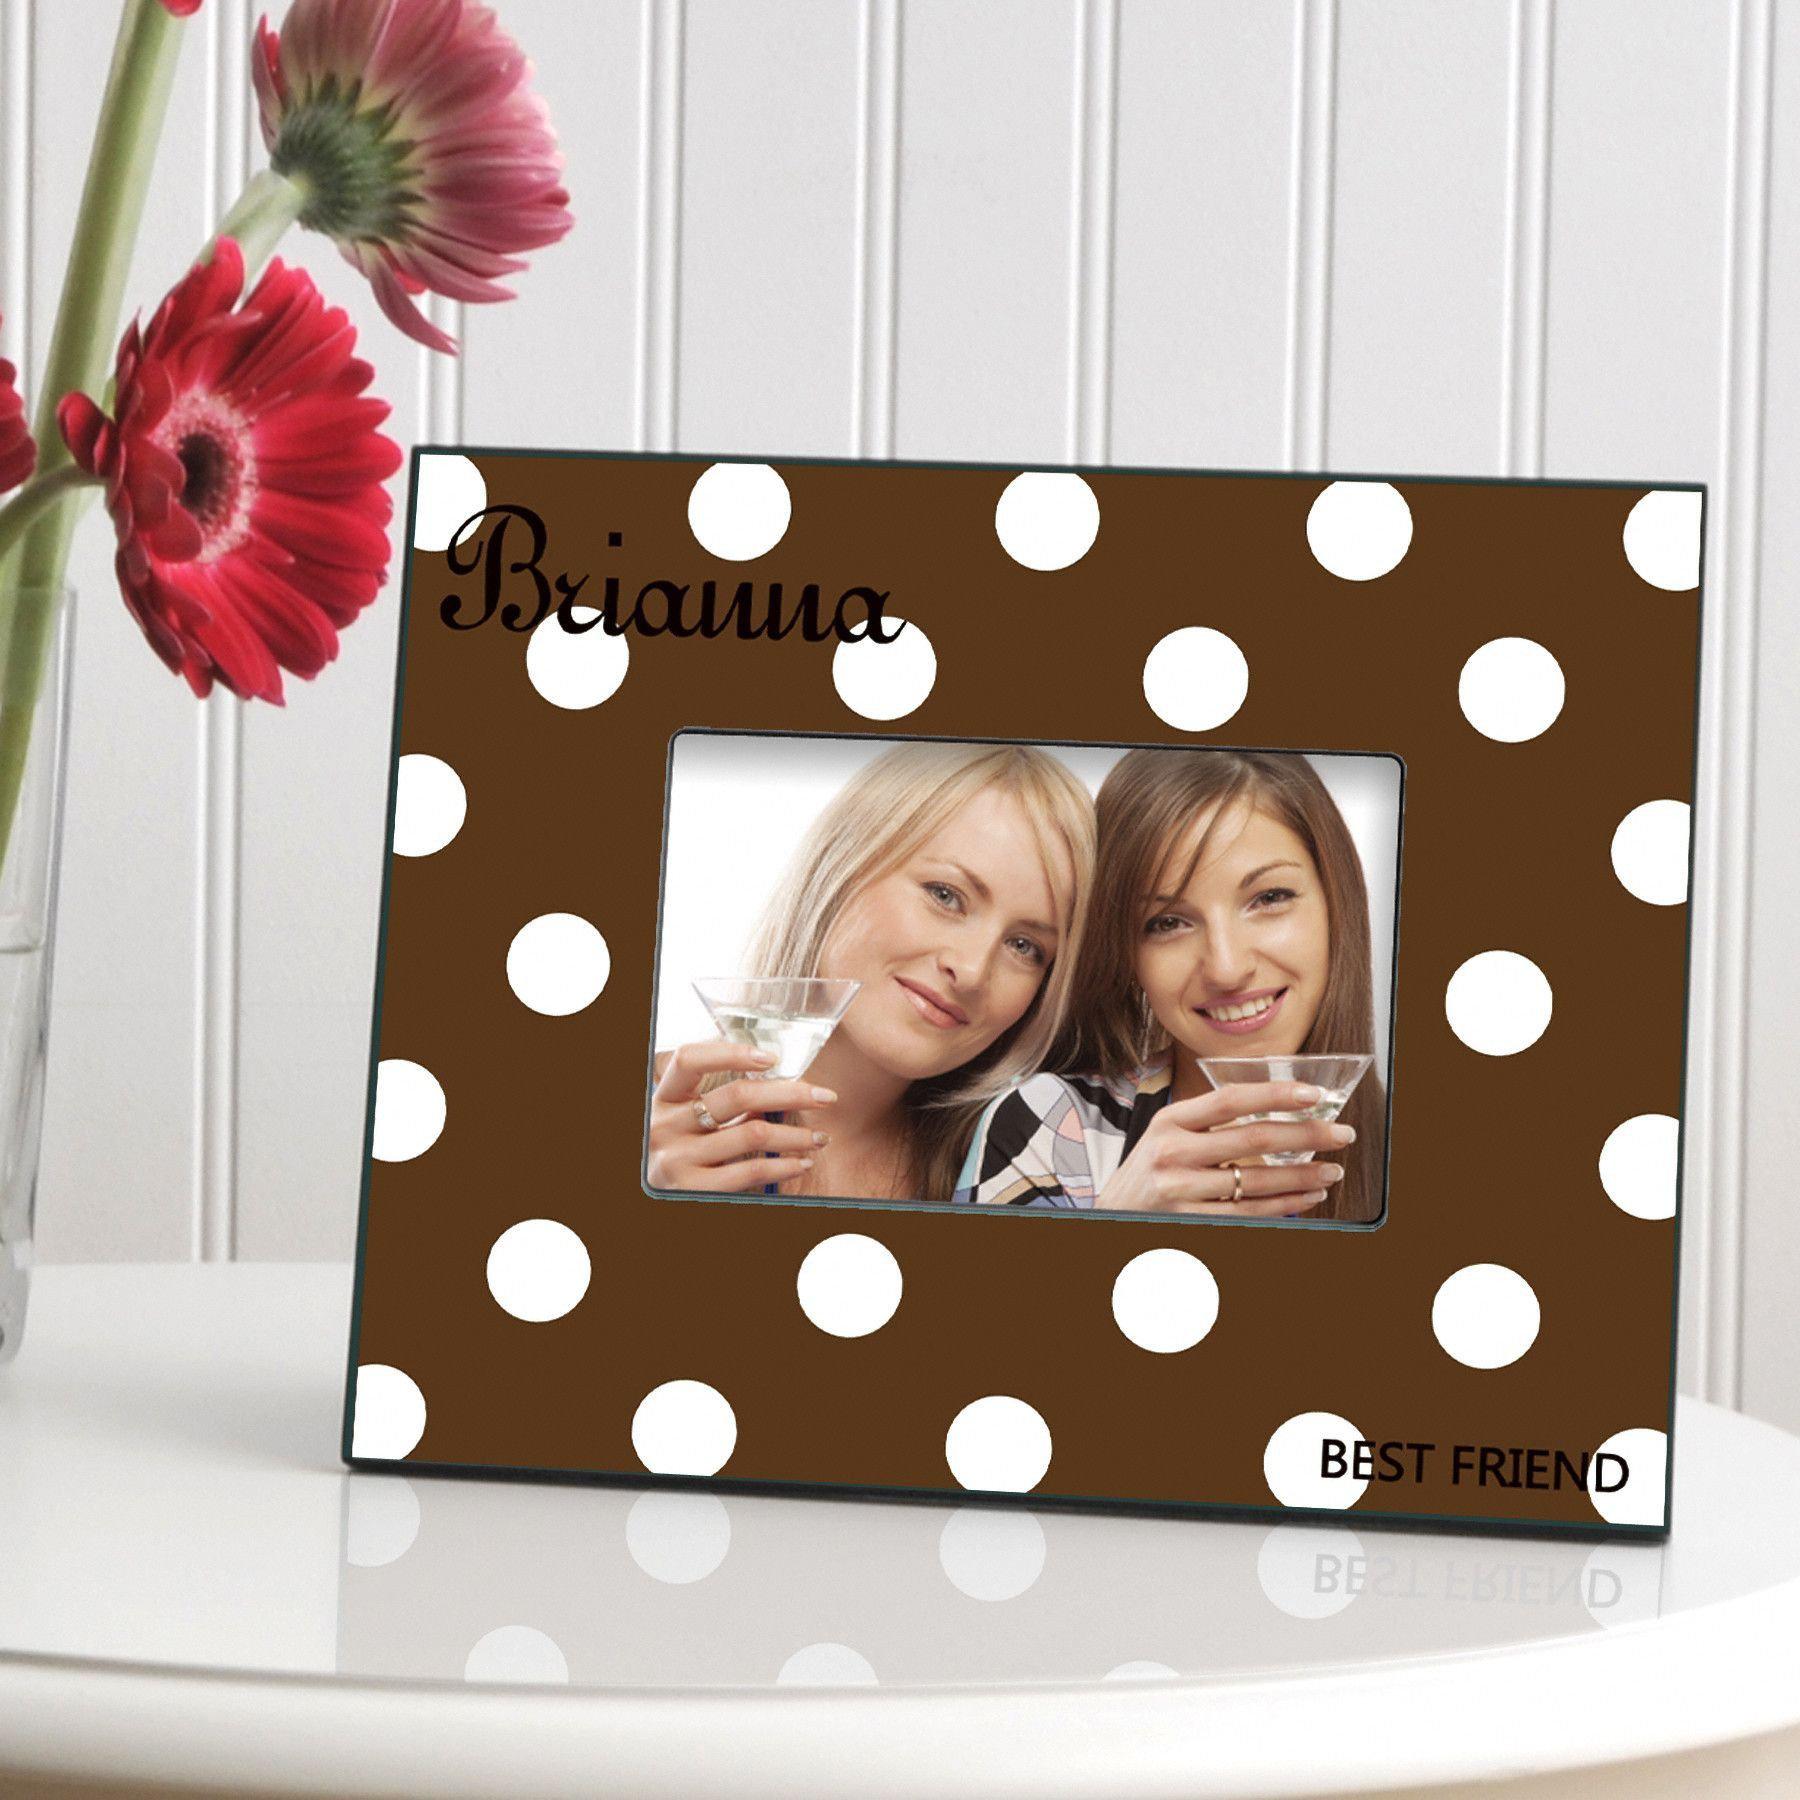 Personalized Polka Dot Picture Frame - All